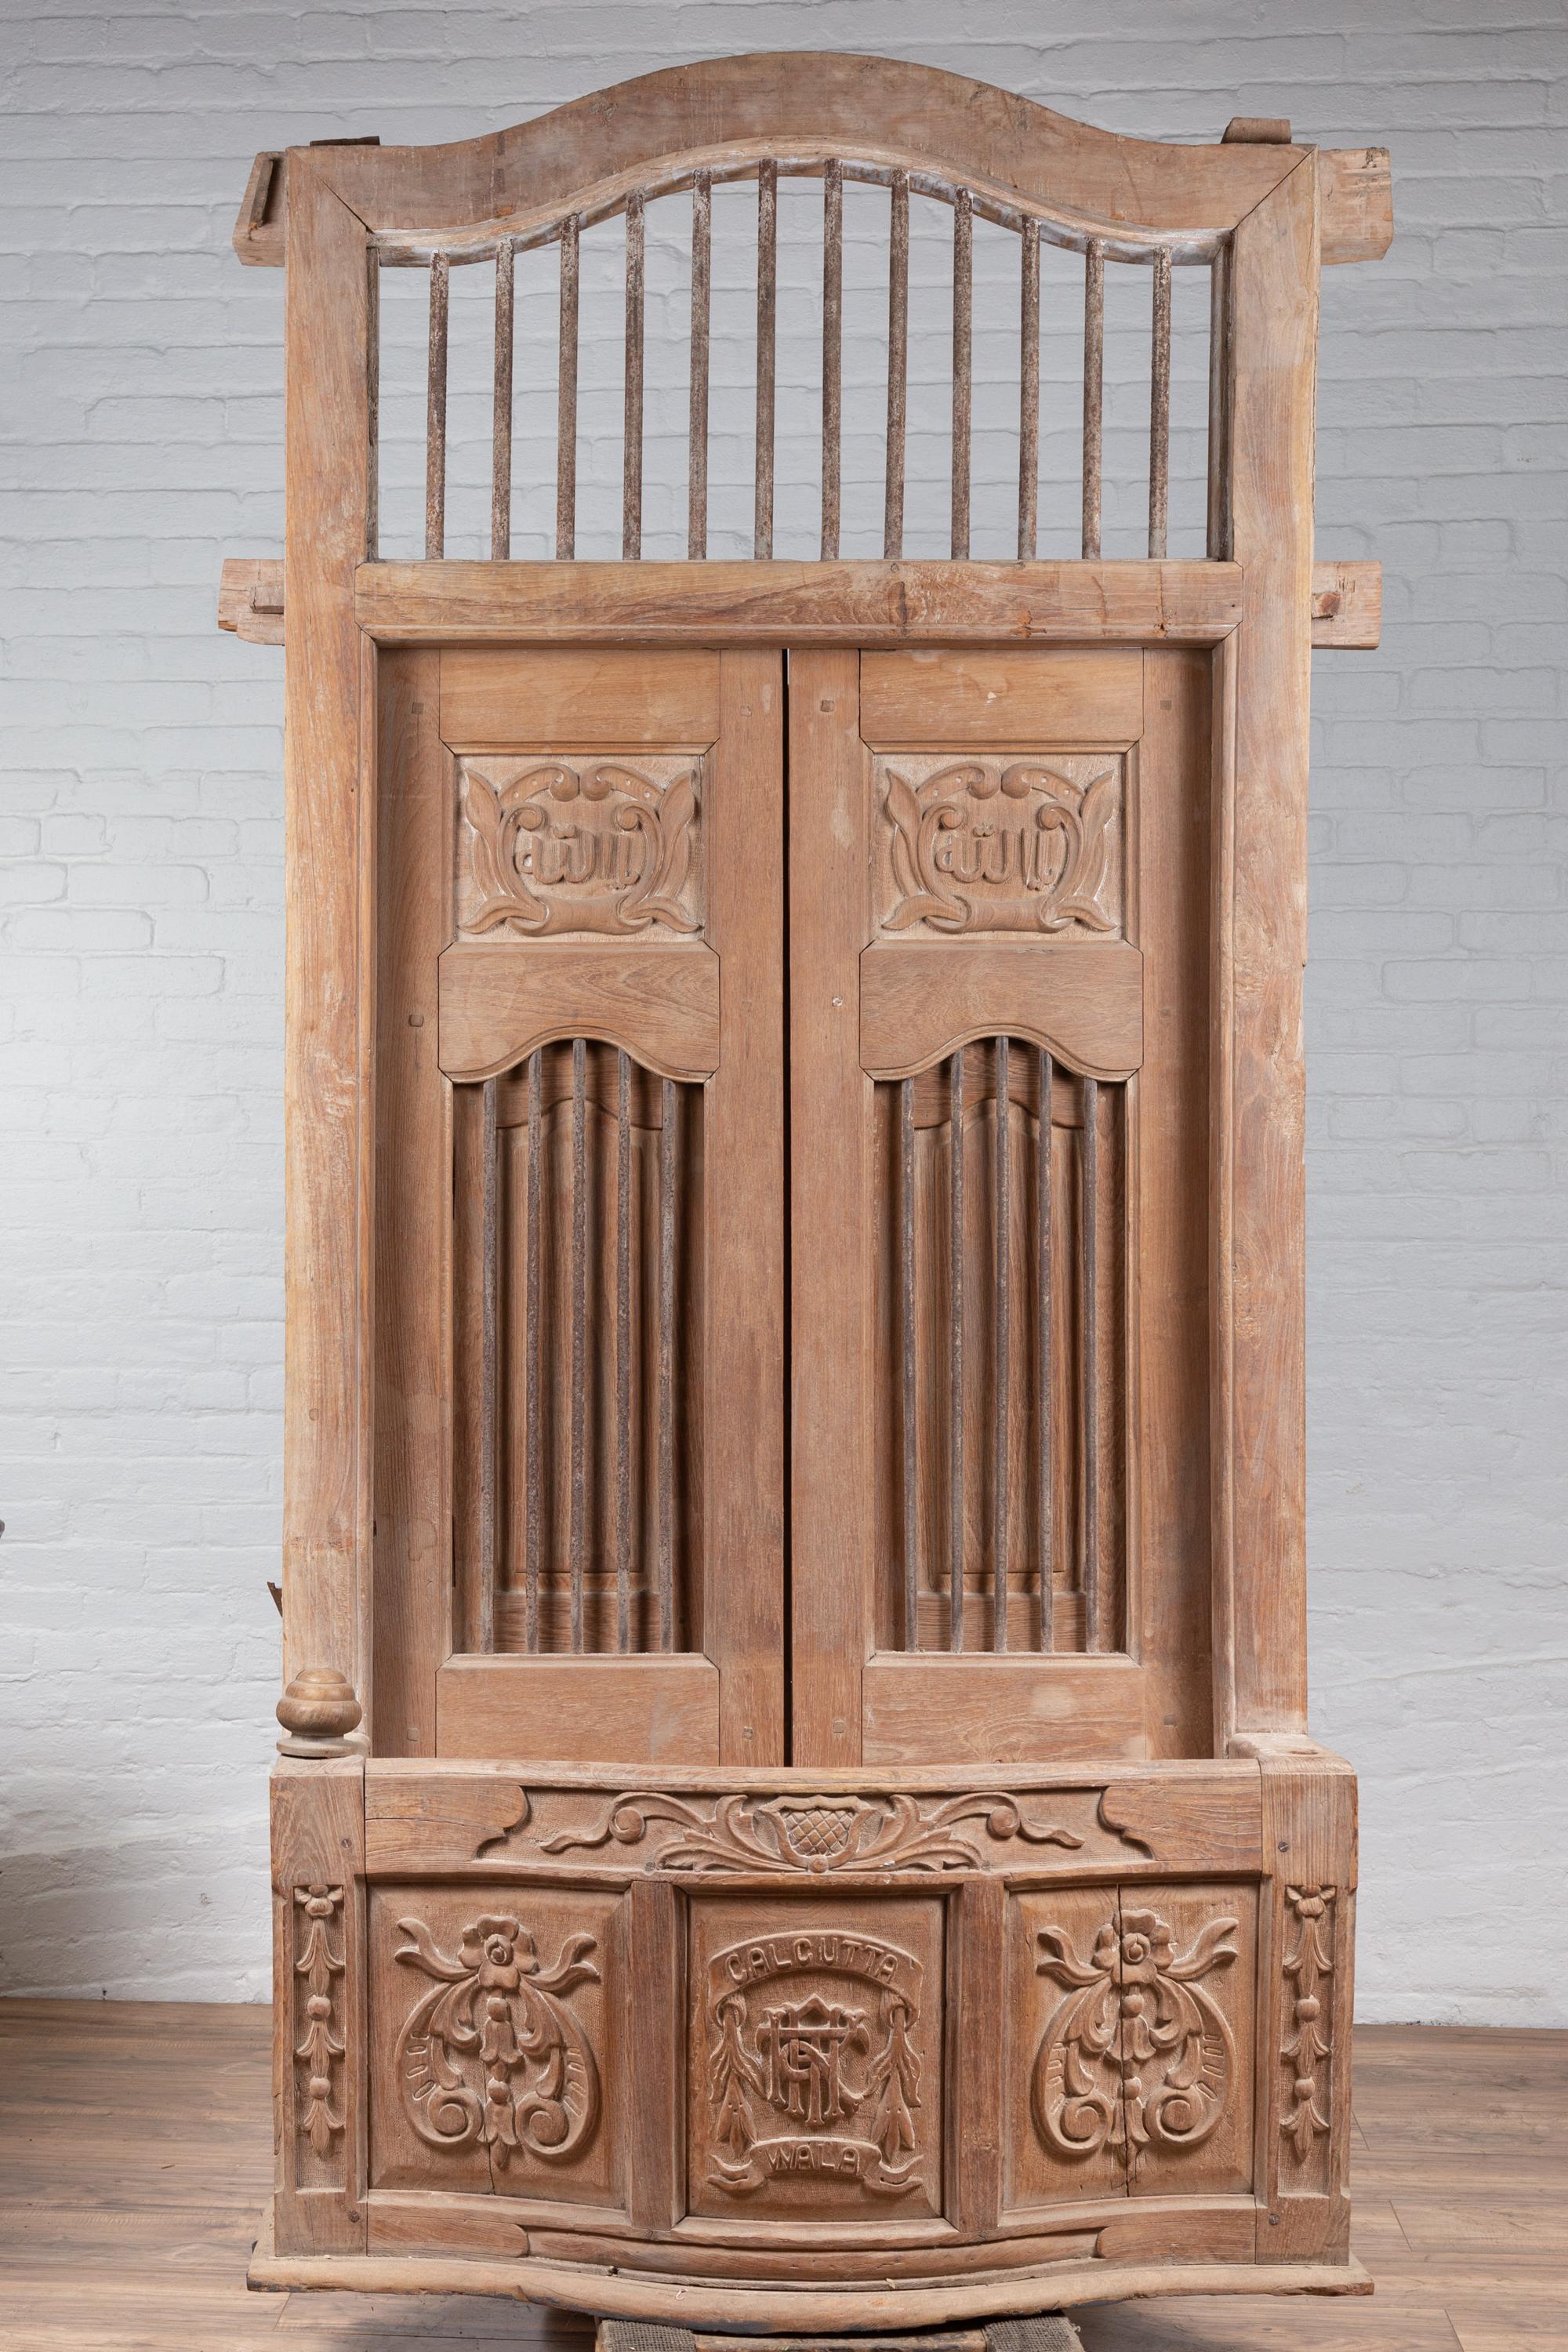 A large Indian hand carved wooden bonnet top window balcony from the early 20th century with rod motifs, calligraphy and foliage. Found in India, this window balcony captivates our attention with its large proportions and natural finish. Adorned